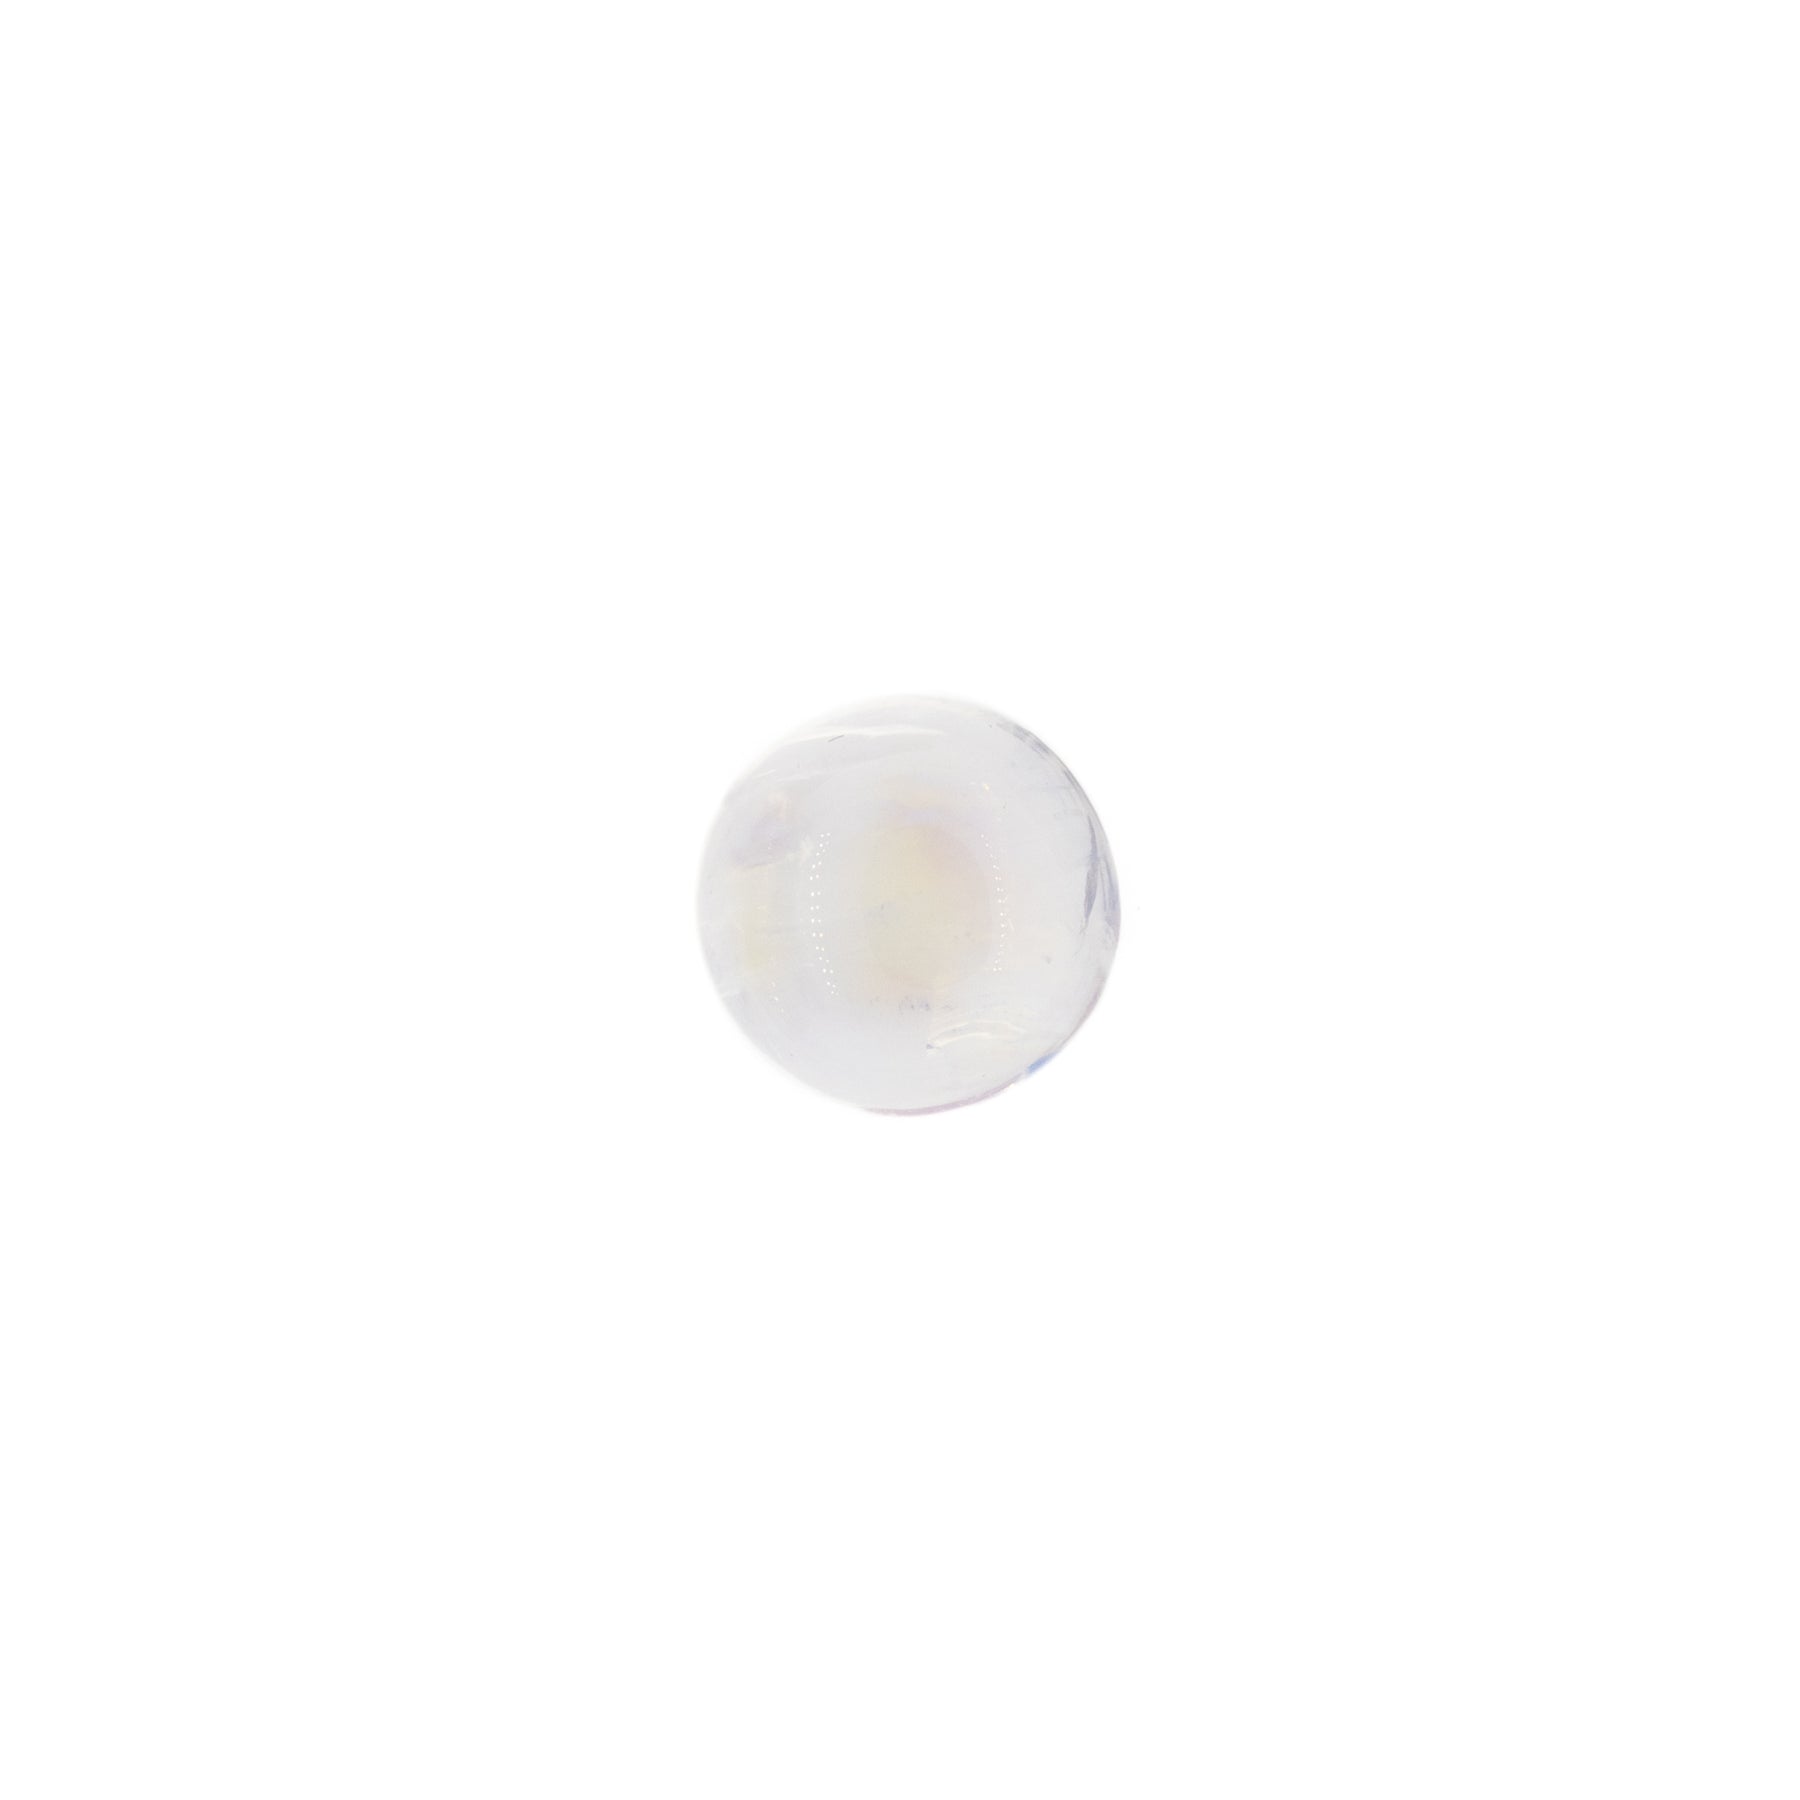 1ct Round Cabochon Cut Natural Rainbow Moonstone (4 pieces)